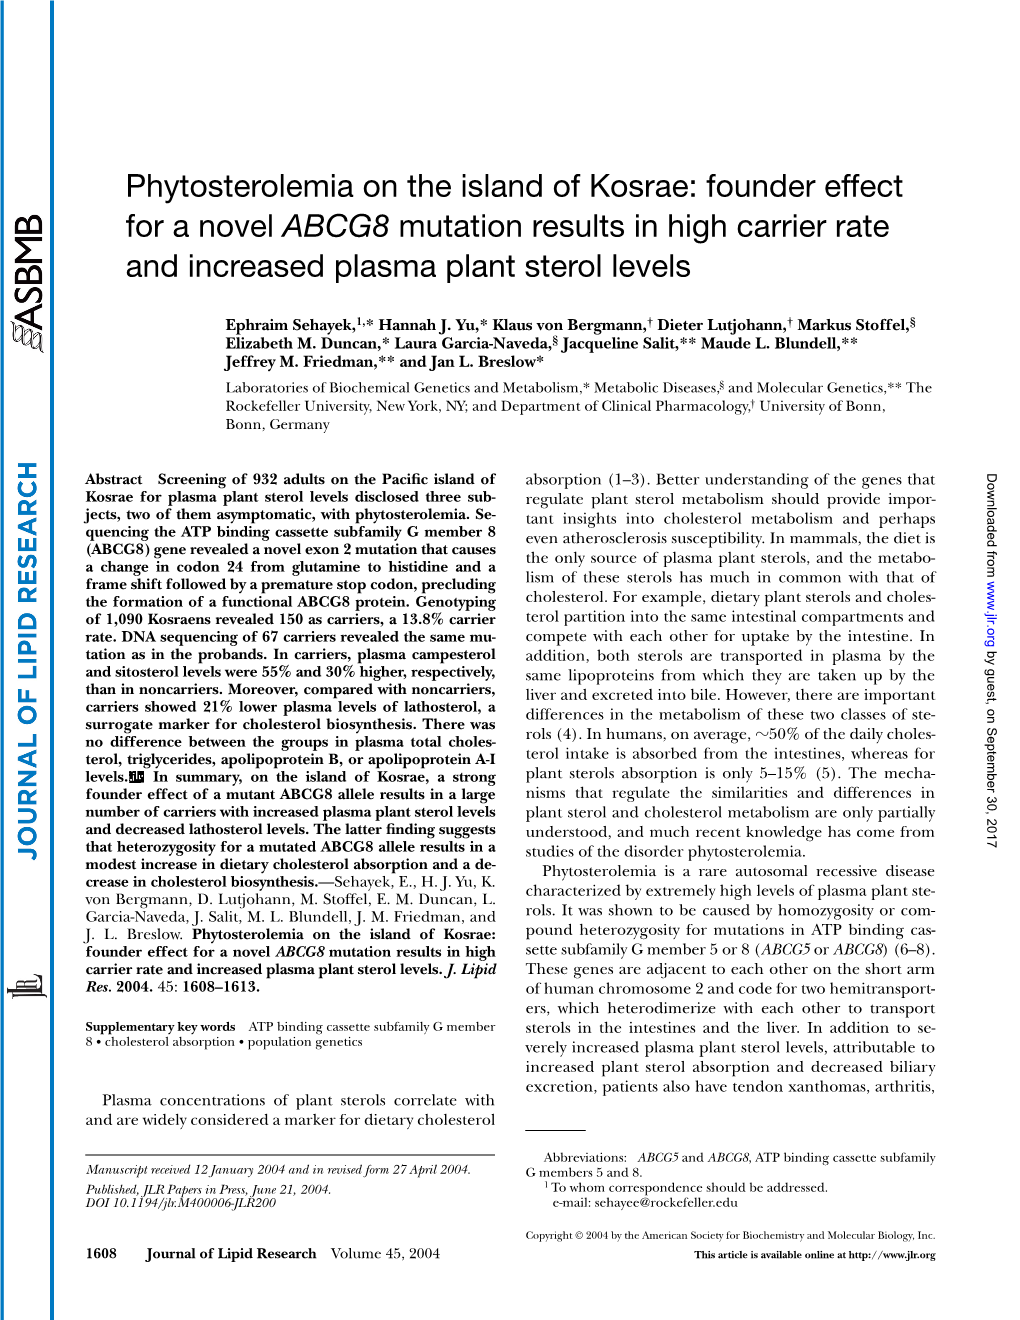 Phytosterolemia on the Island of Kosrae: Founder Effect for a Novel ABCG8 Mutation Results in High Carrier Rate and Increased Plasma Plant Sterol Levels